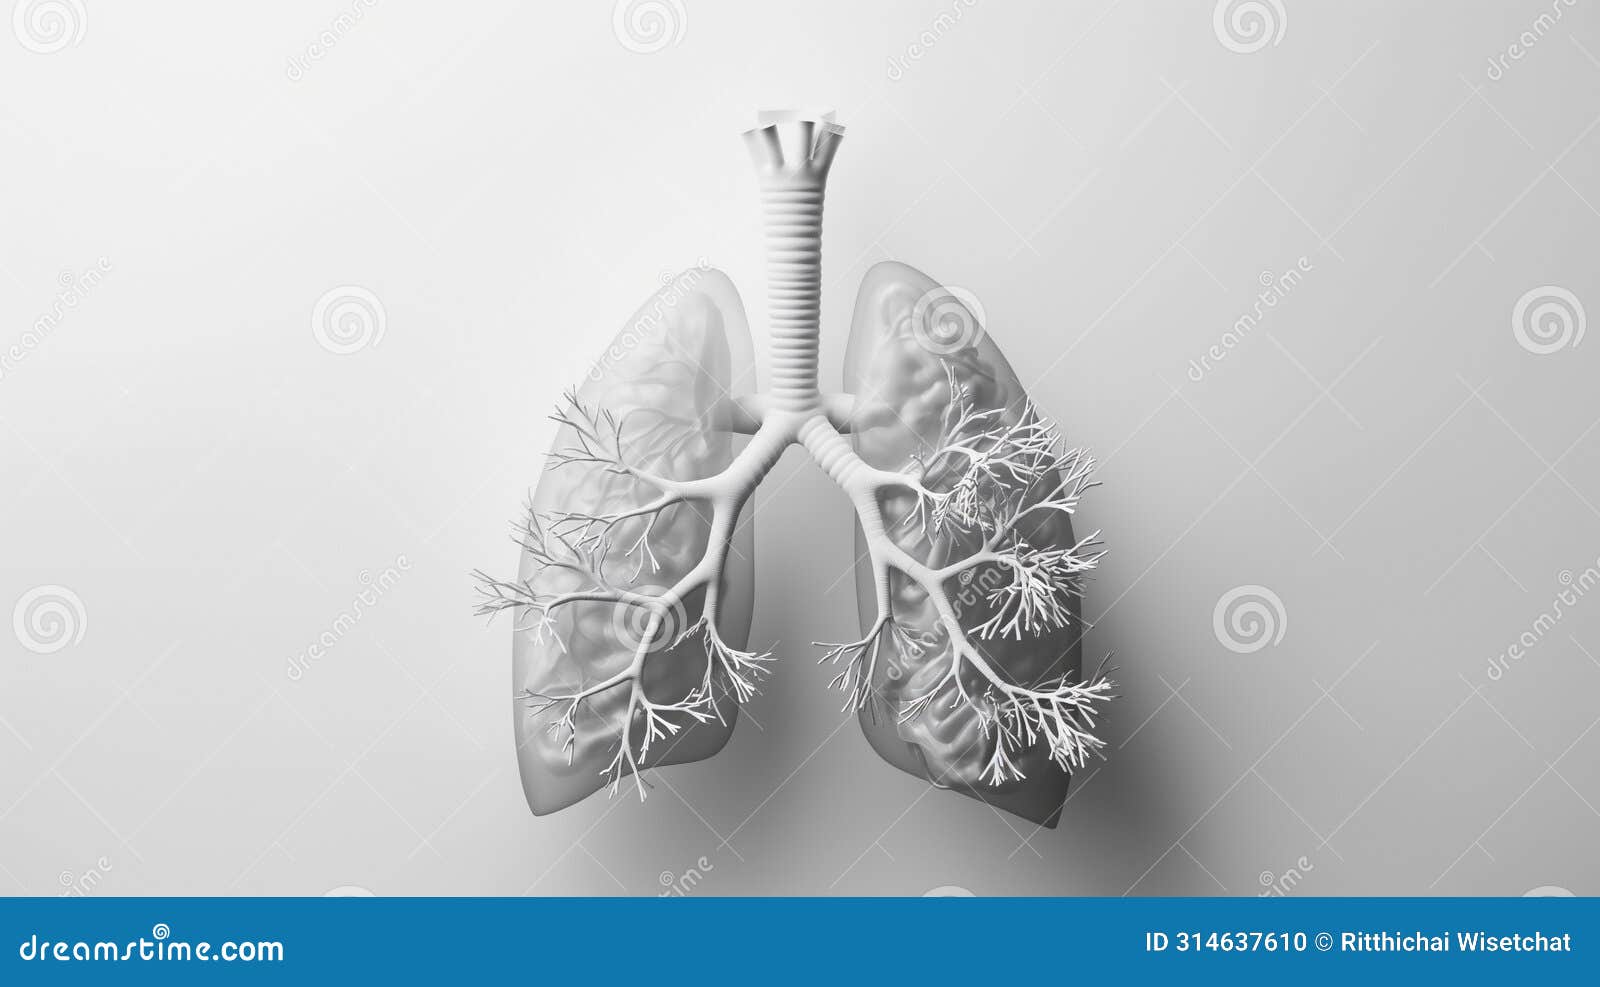 a detailed 3d render of human lungs and airways on a plain background, focusing on respiratory anatomy